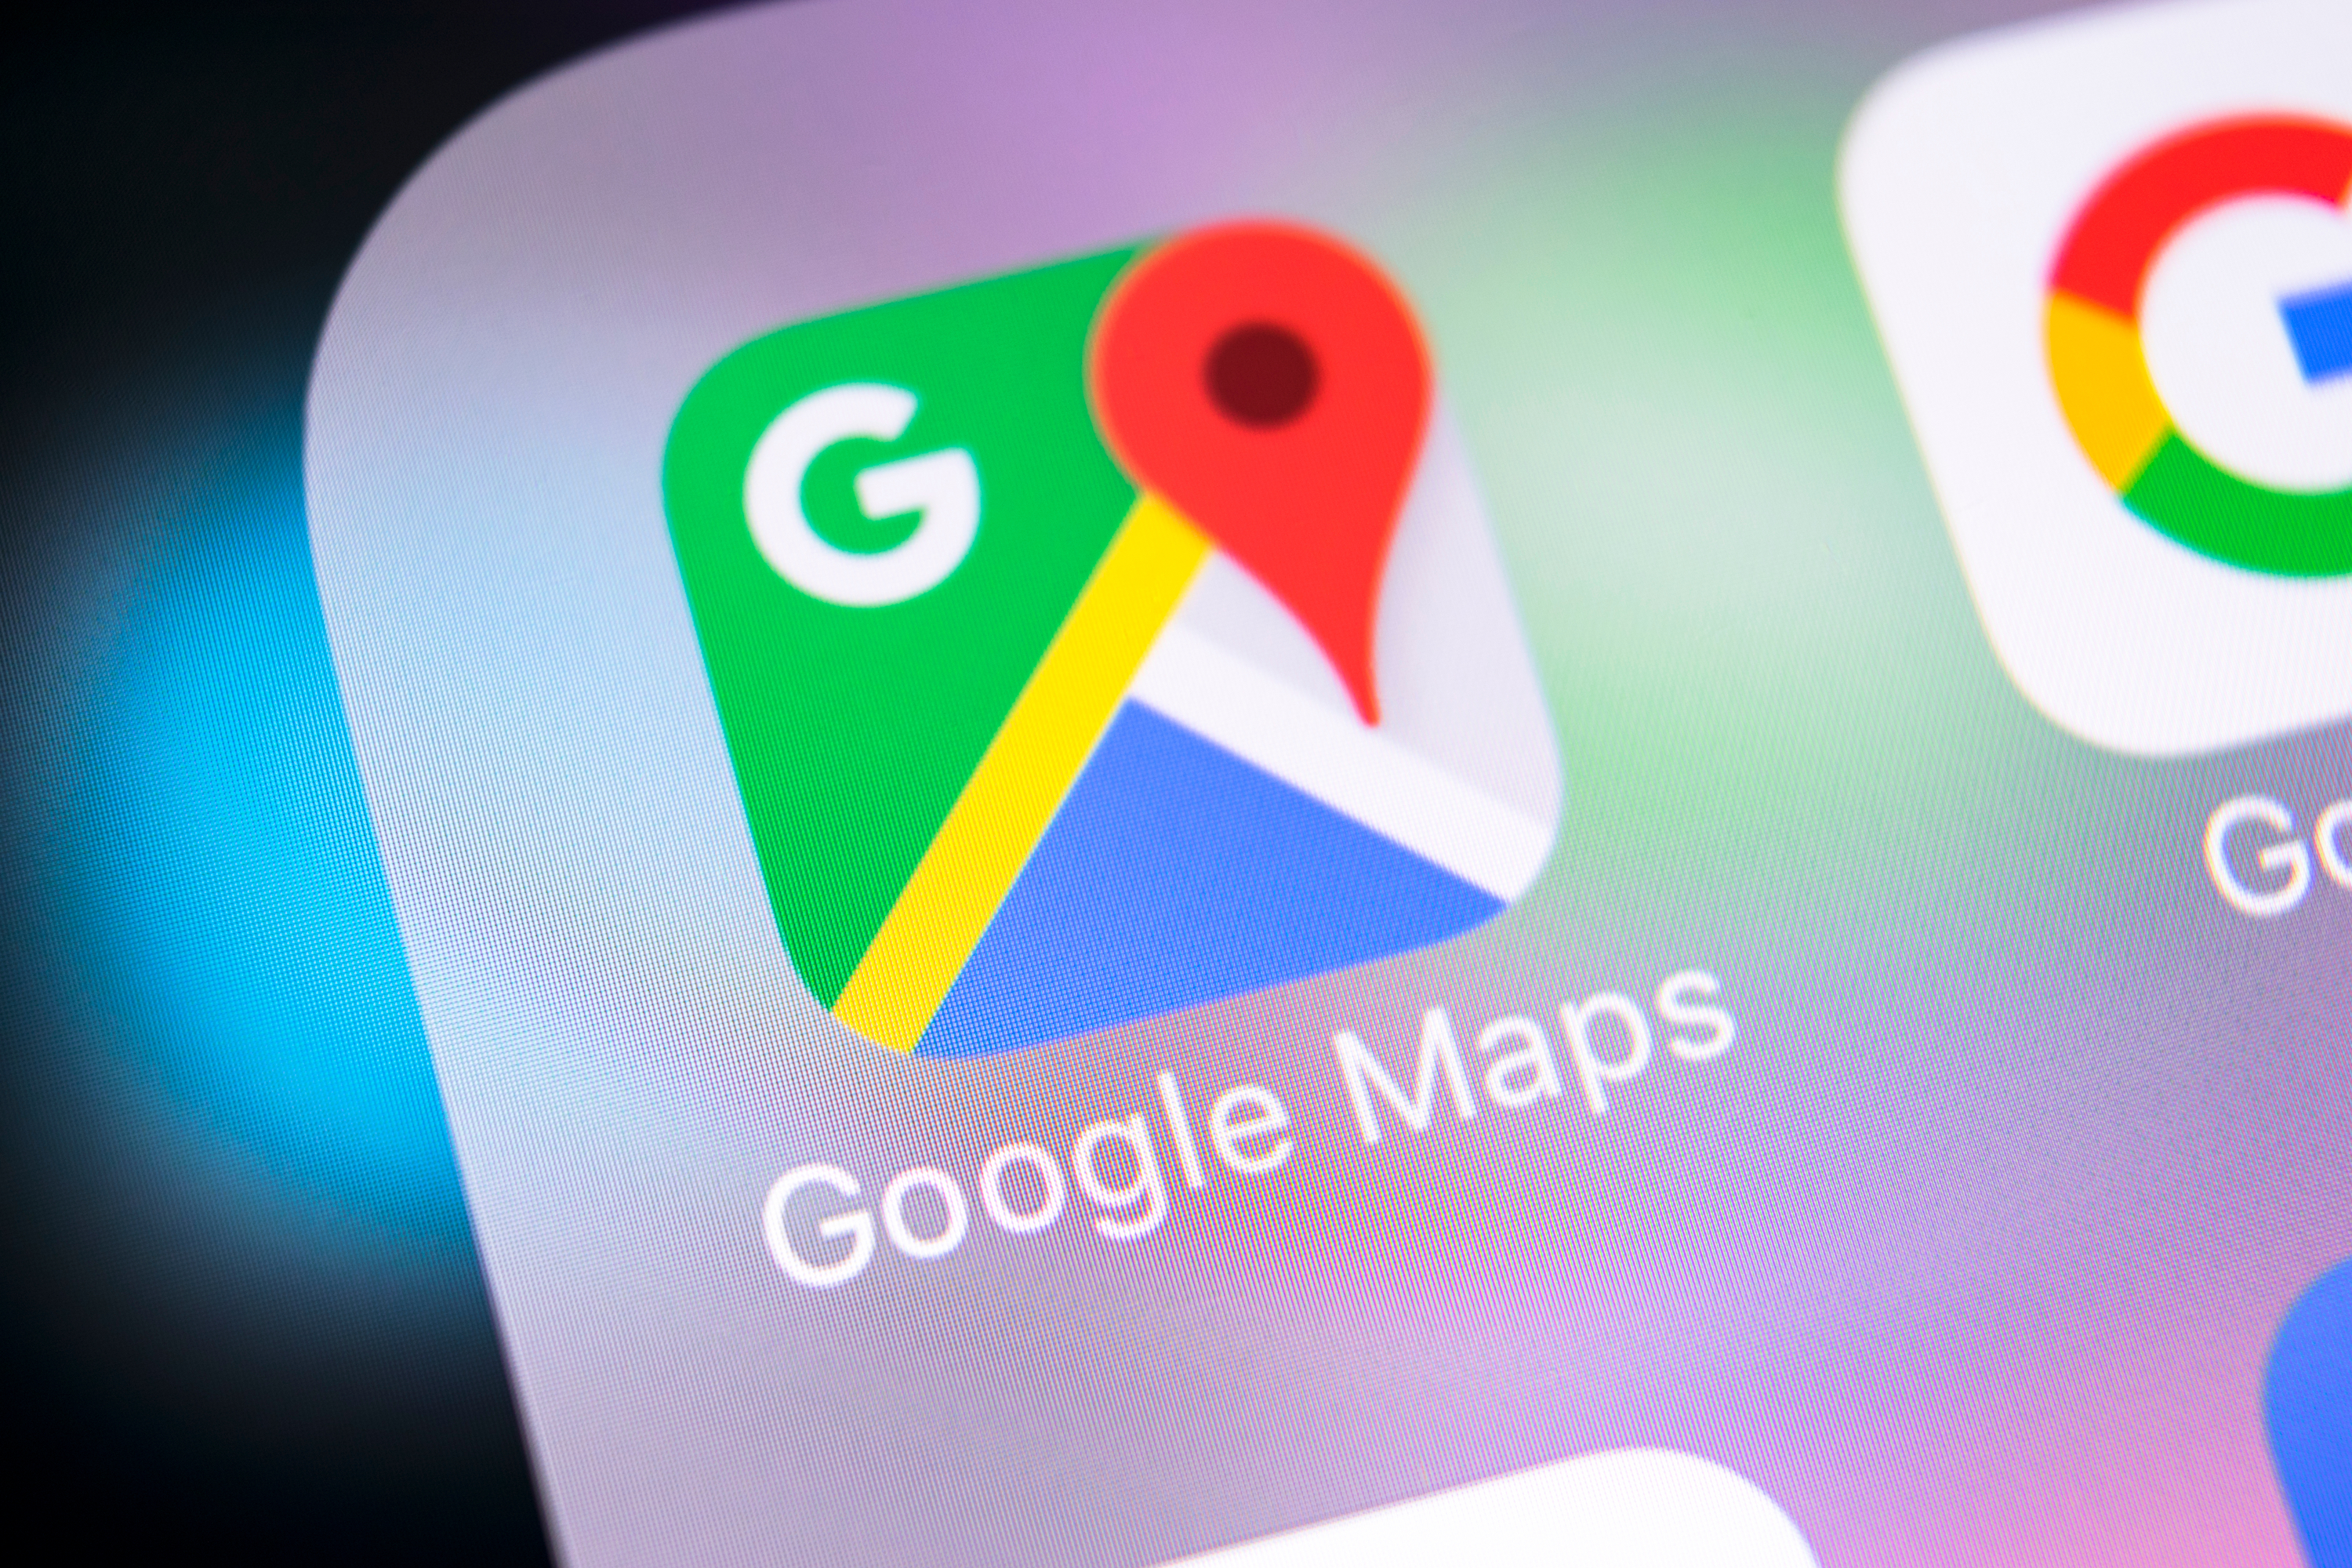 Google Maps icon on a phone screen